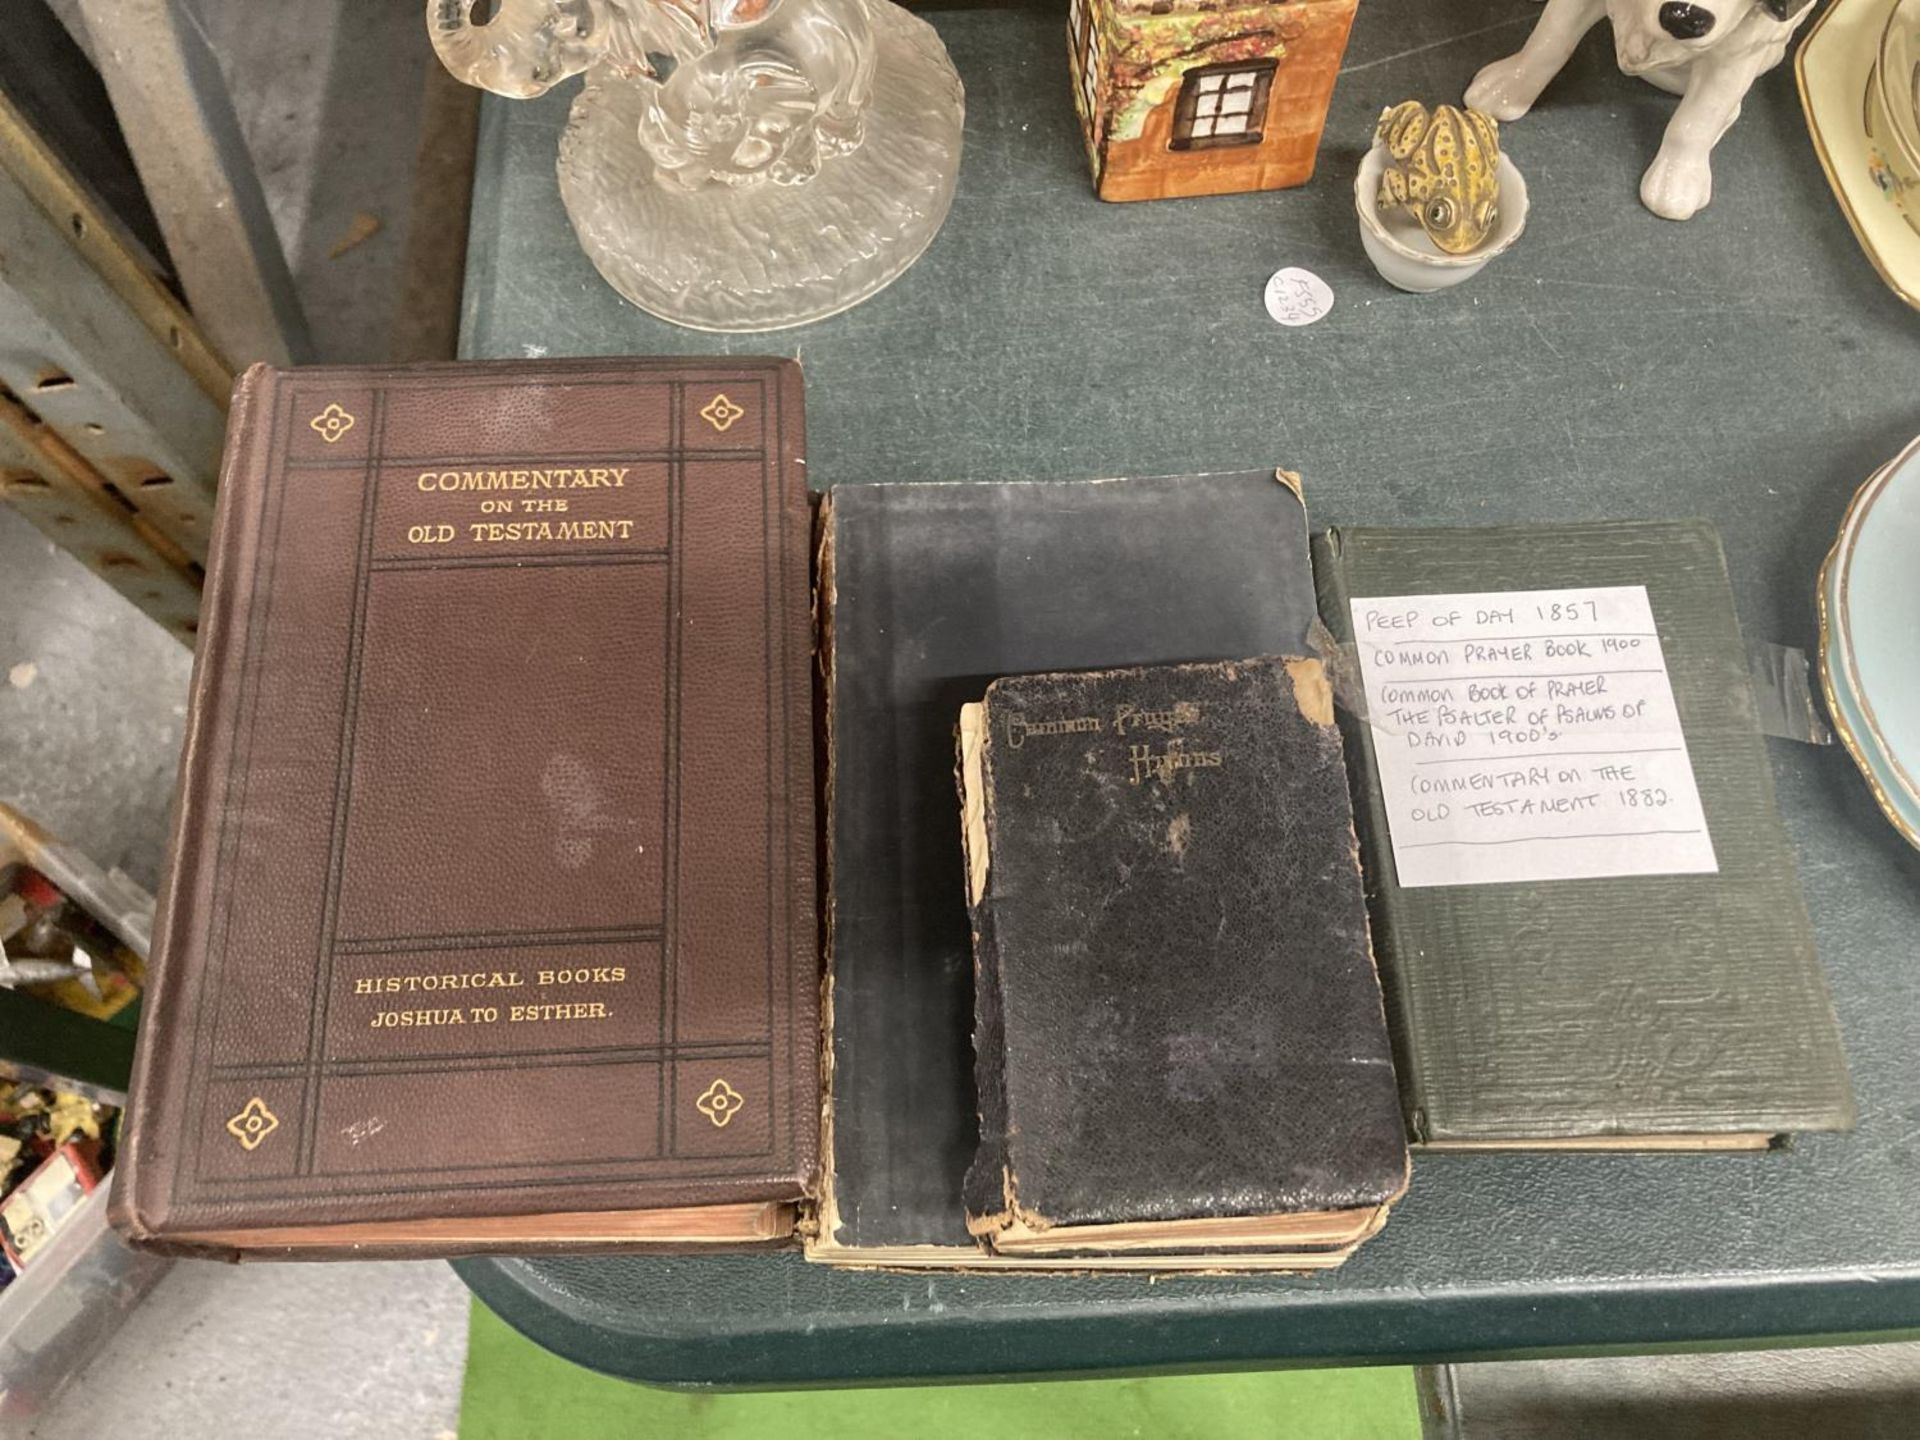 FOUR VINTAGE RELIGIOUS BOOKS TO INCLUDE - PEEP OF DAY 1857, COMMON BOOK OF PRAYER 1900, COMMON